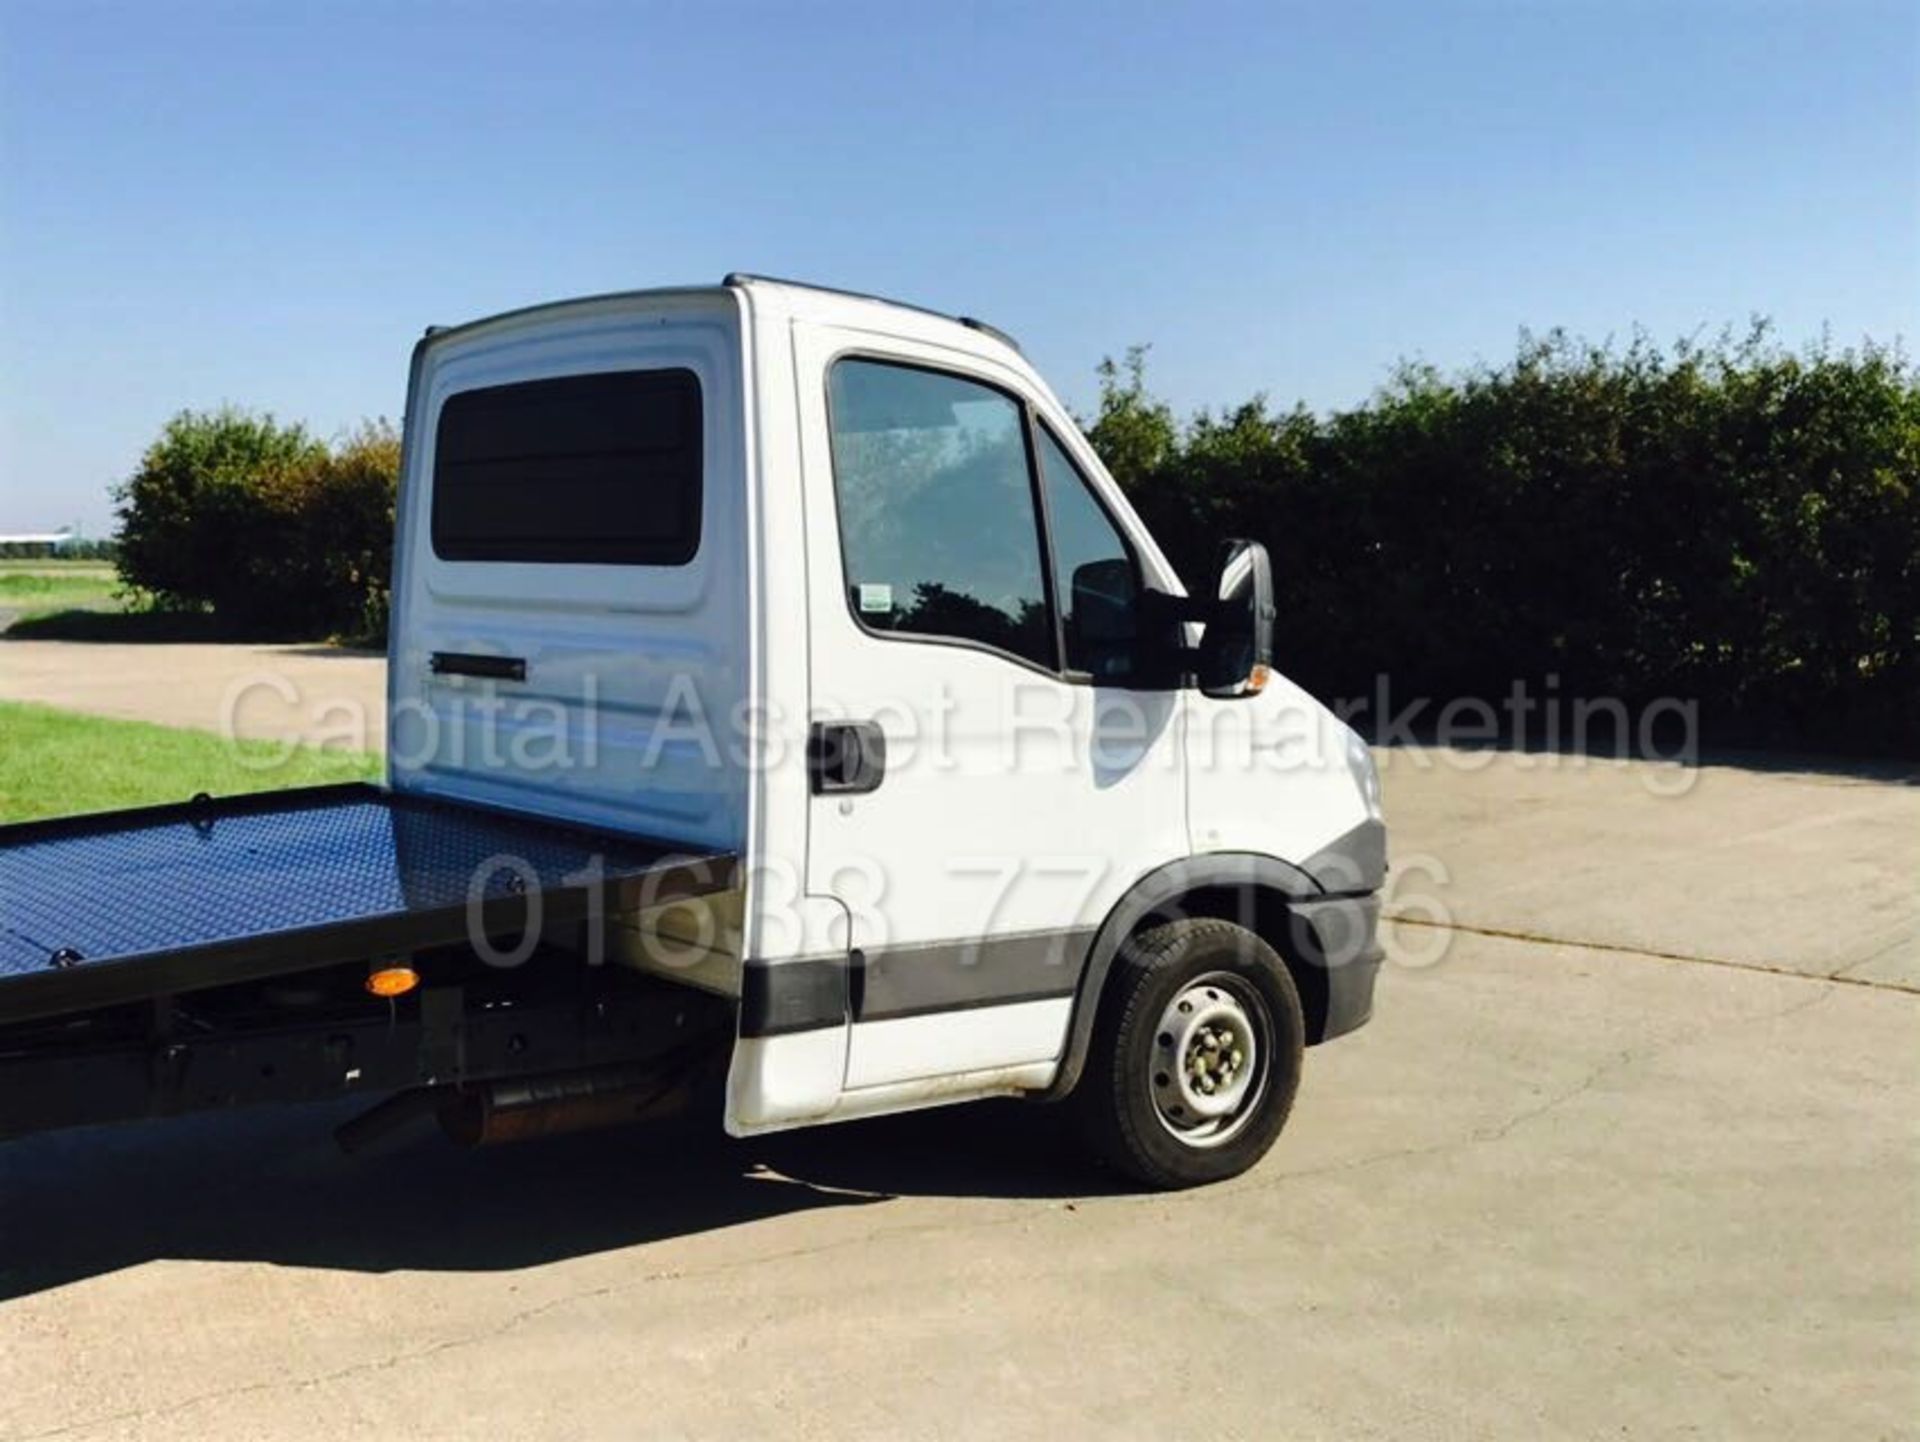 (On Sale) IVECO DAILY 35S11 'LWB - RECOVERY TRUCK' (2013 - 13 REG) '2.3 DIESEL - 110 BHP - 6 SPEED' - Image 9 of 16